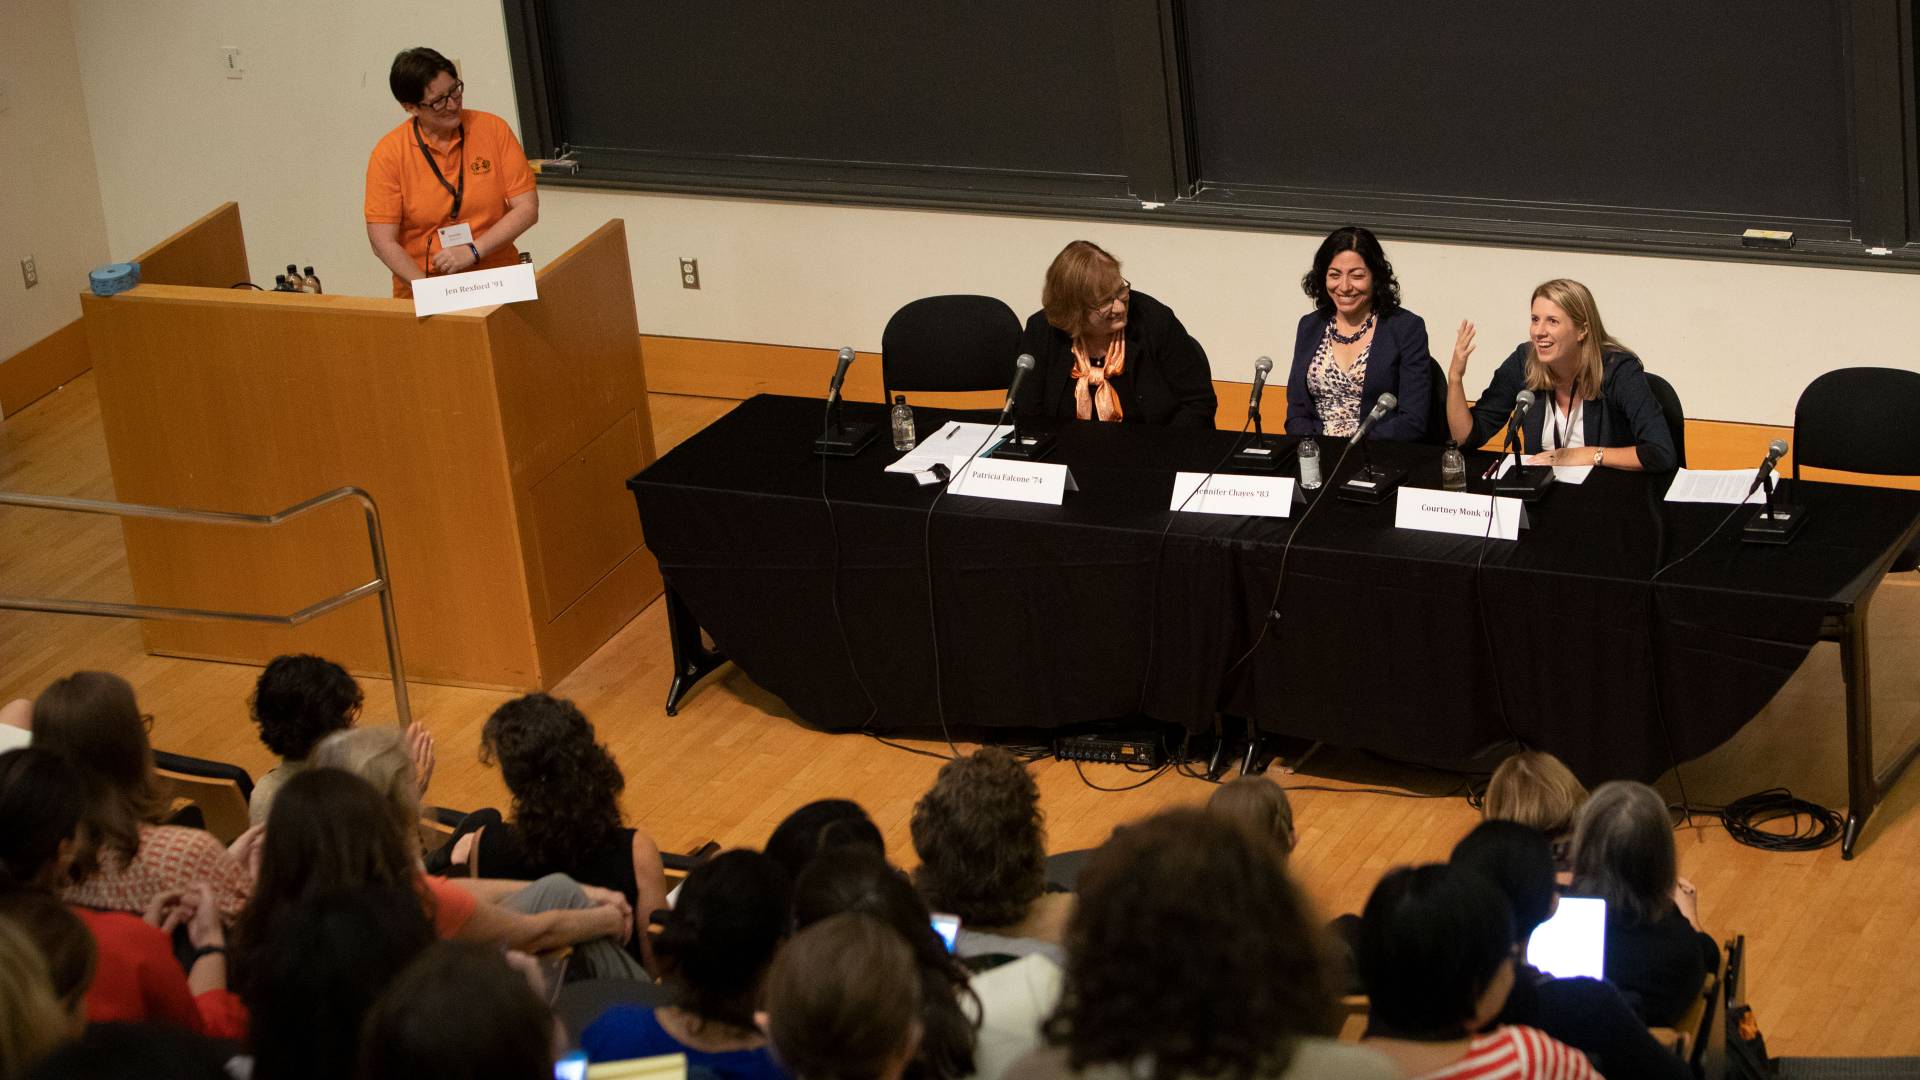 Jennifer Rexford '91 at podium; at table left to right:  Patricia Falcone '74, Jennifer Chayes *83, Courtney Monk '01